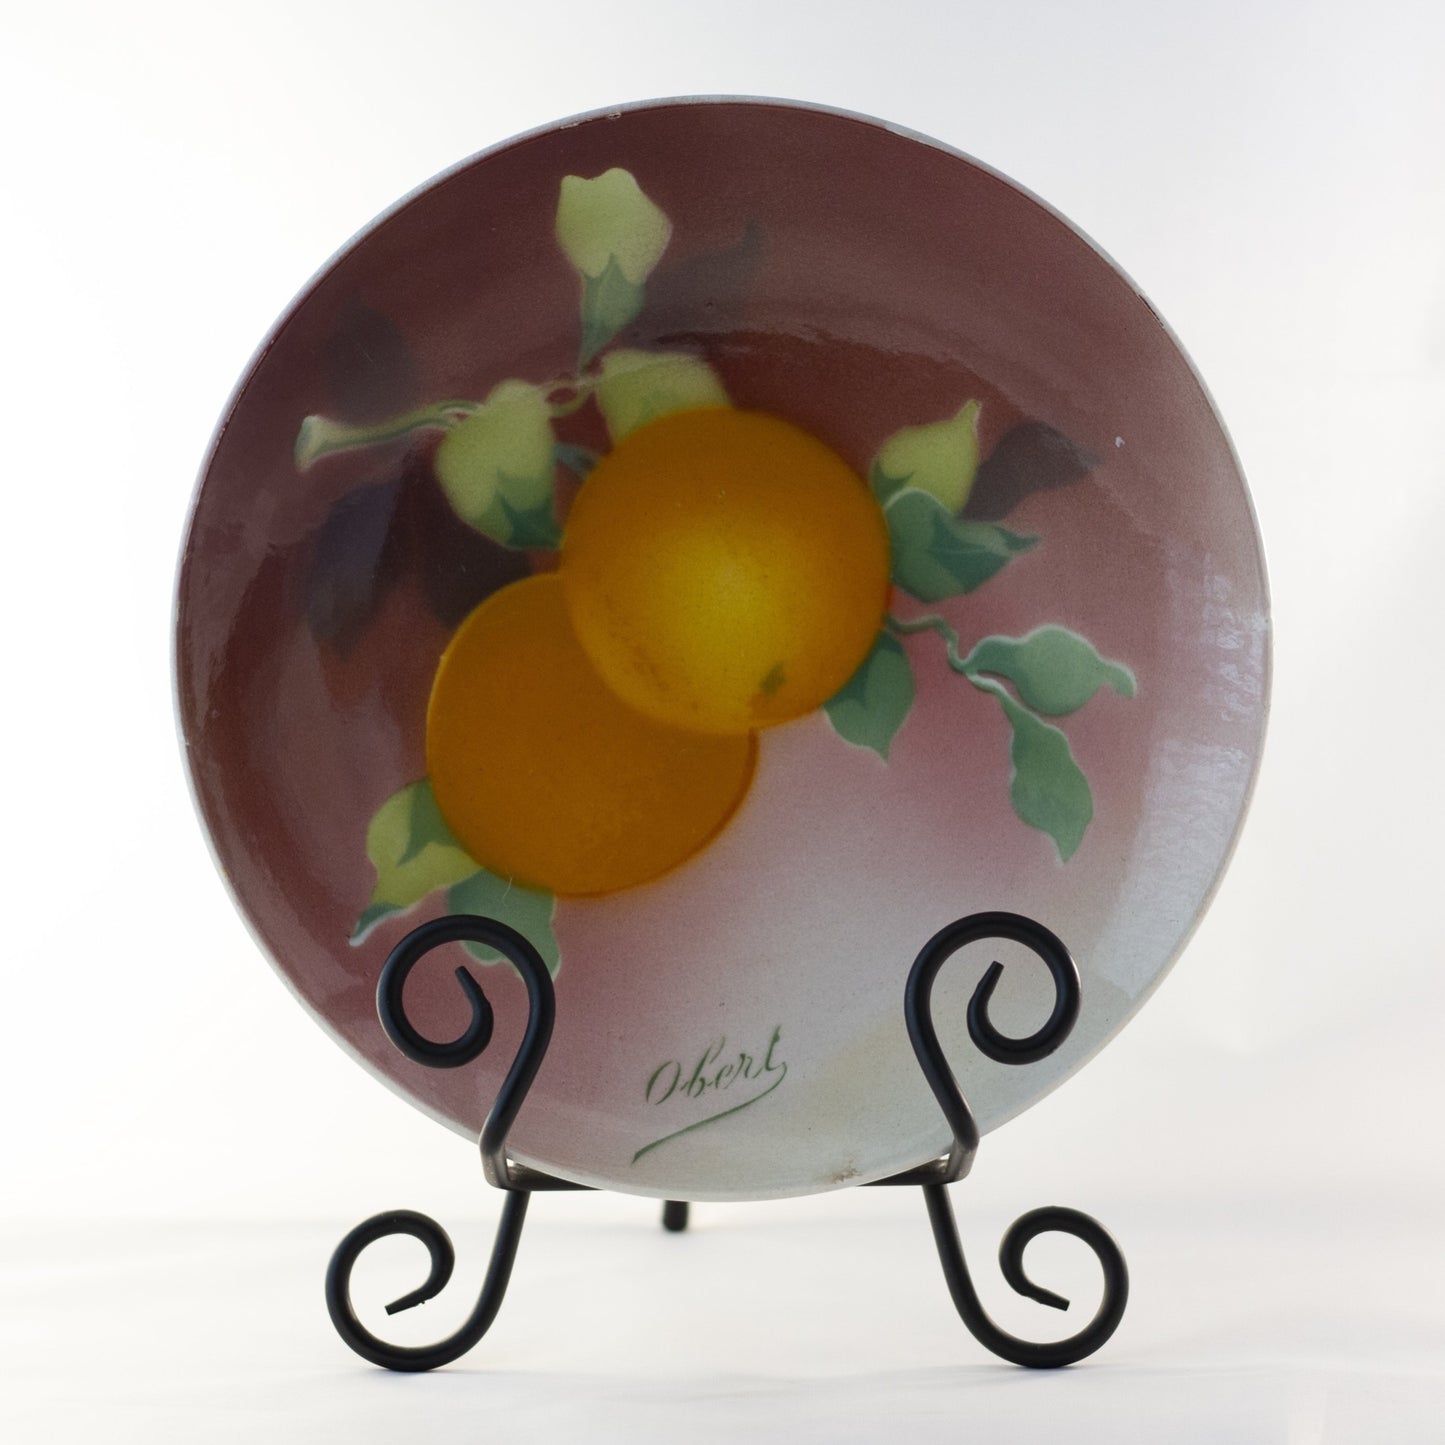 K & G LUNEVILLE FRENCH FAIENCE PLATE HAND PAINTED ORANGES Signed Obert Circa 1900